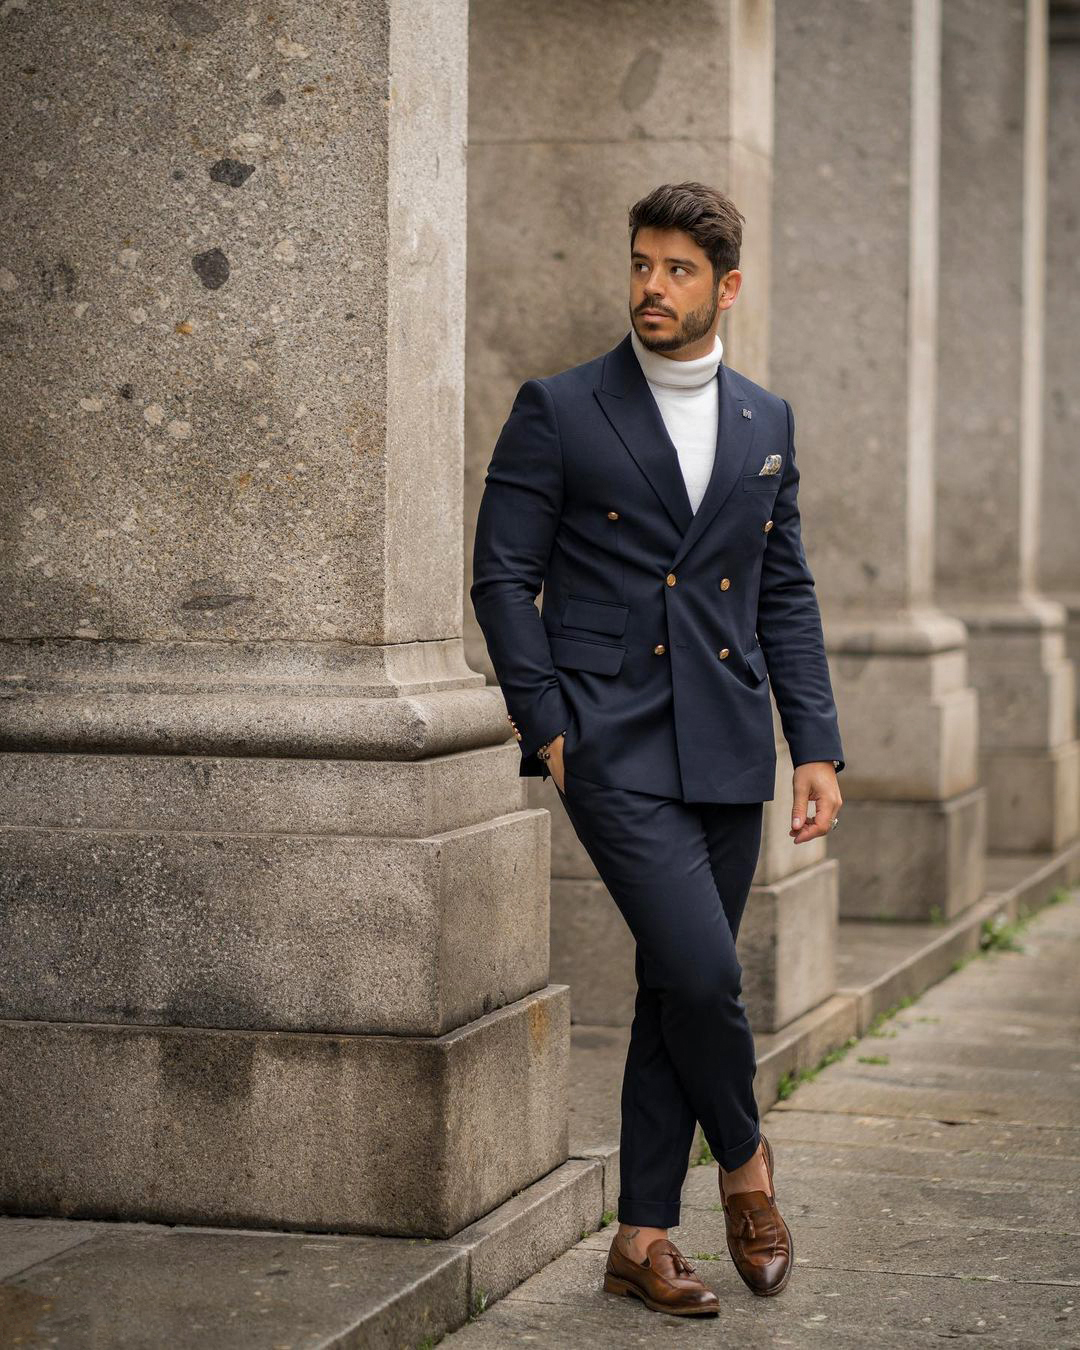 double-breasted navy suit and white turtleneck